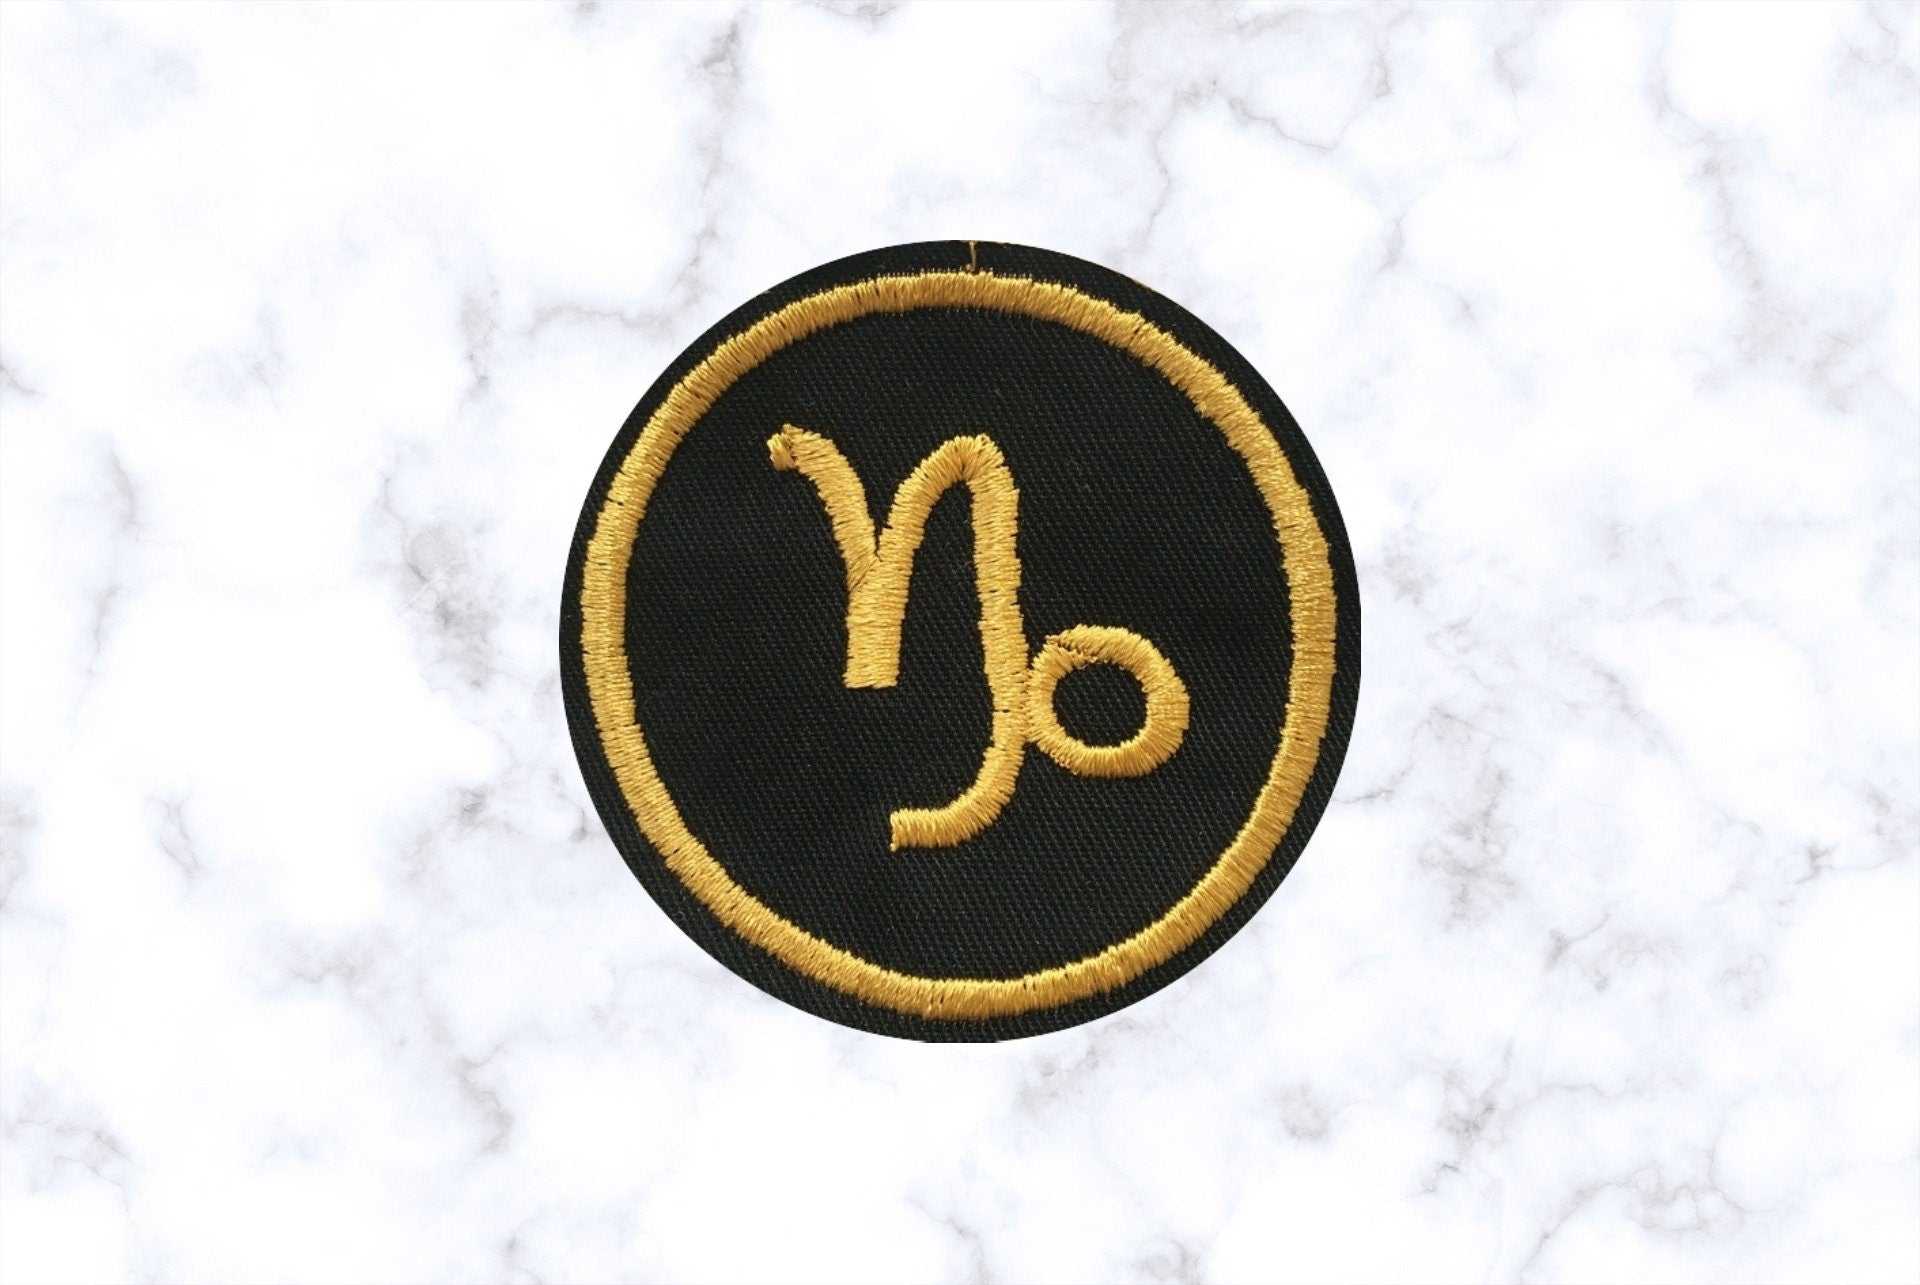 Zodiacs Signs Astrology Iron/Sew-On Embroidered Patch Applique diy -Galaxy Spirit -Emblems Costumes Cosplay Patches for Clothing Vest Jacket